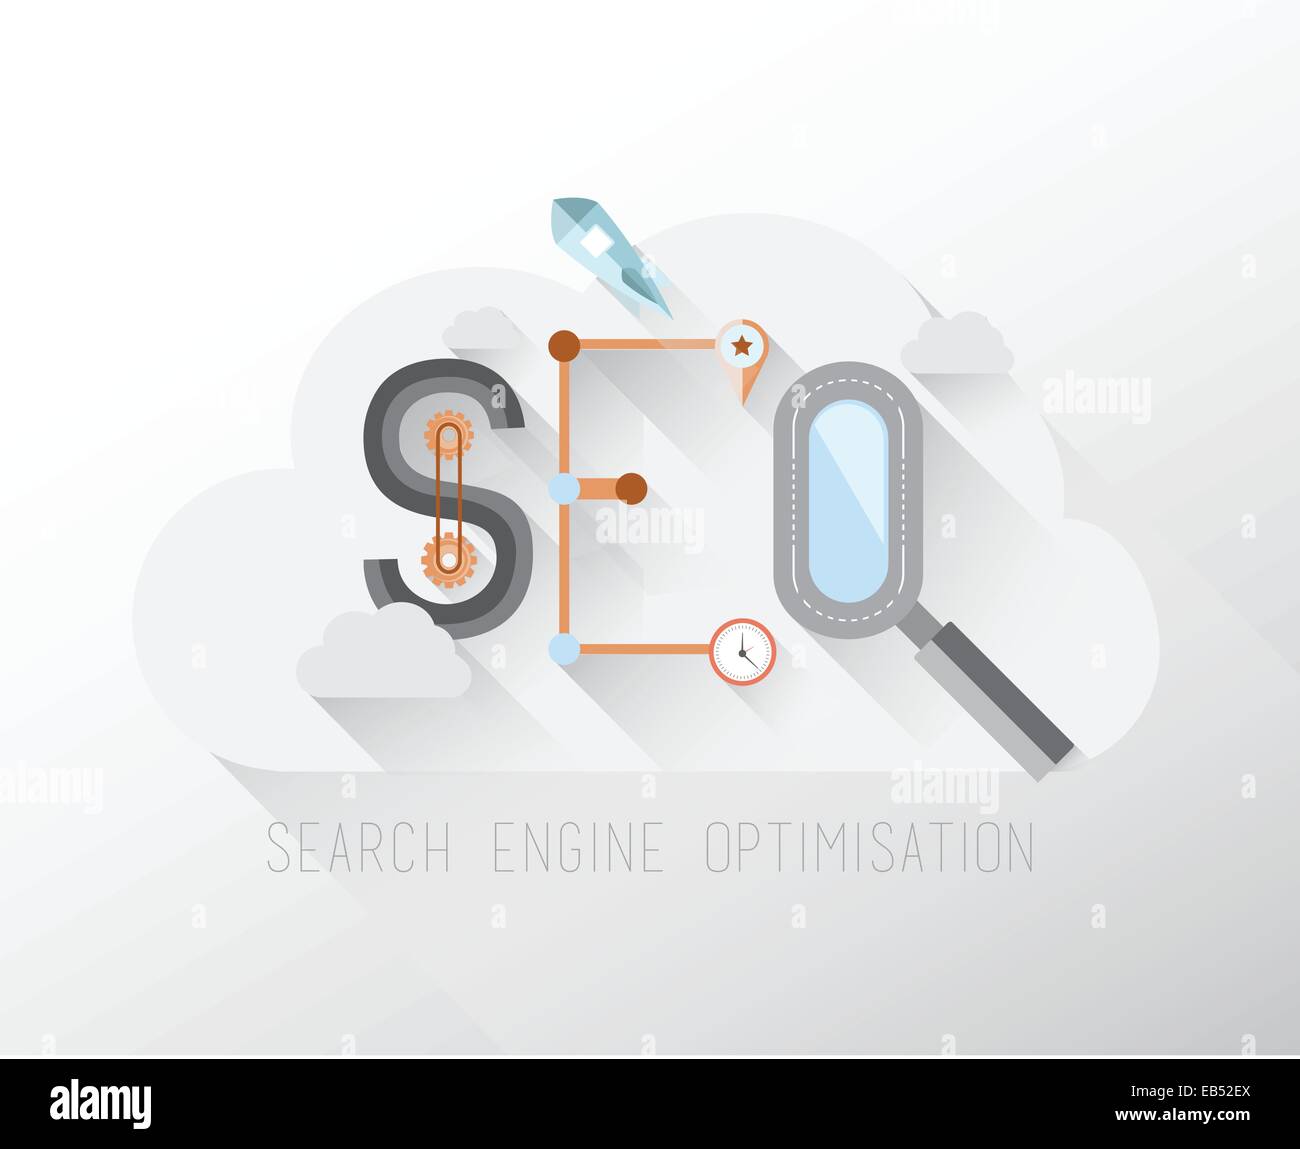 Search engine optimization graphic in a cloud Stock Vector